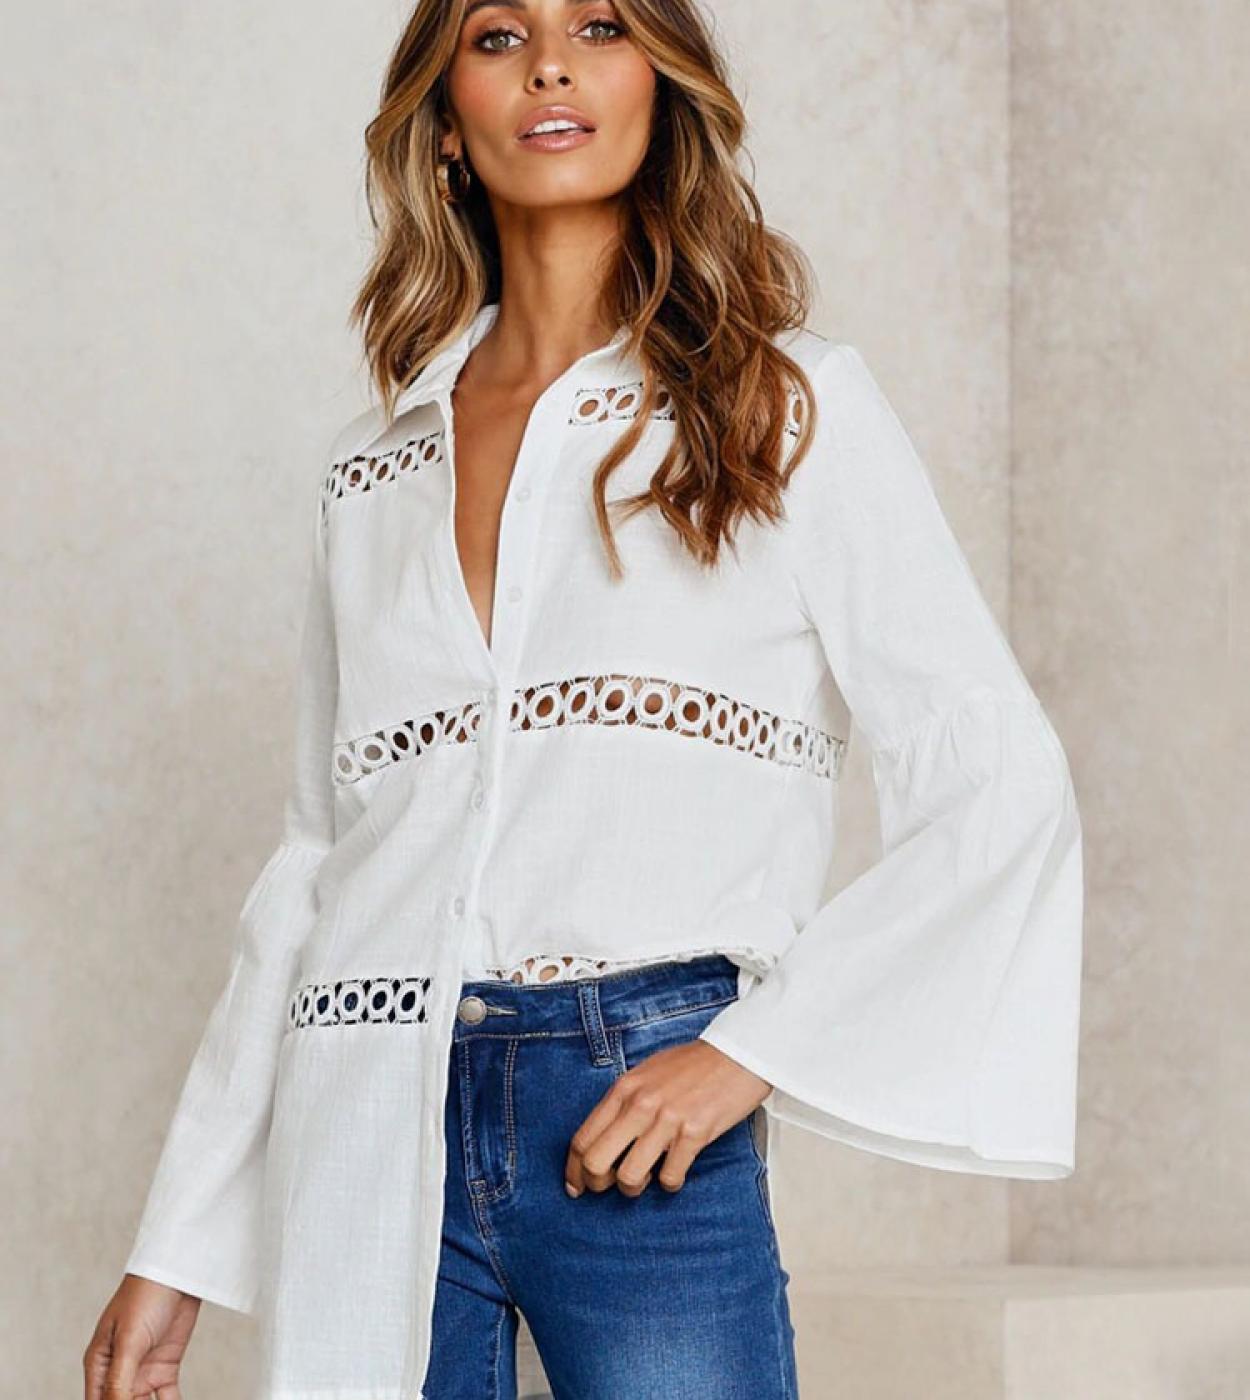 Hollow Out Flare Long Sleeve Shirt Fashion Ladies Turndown Collar White Long Blouse For Women Elegant Loose Tops Female 